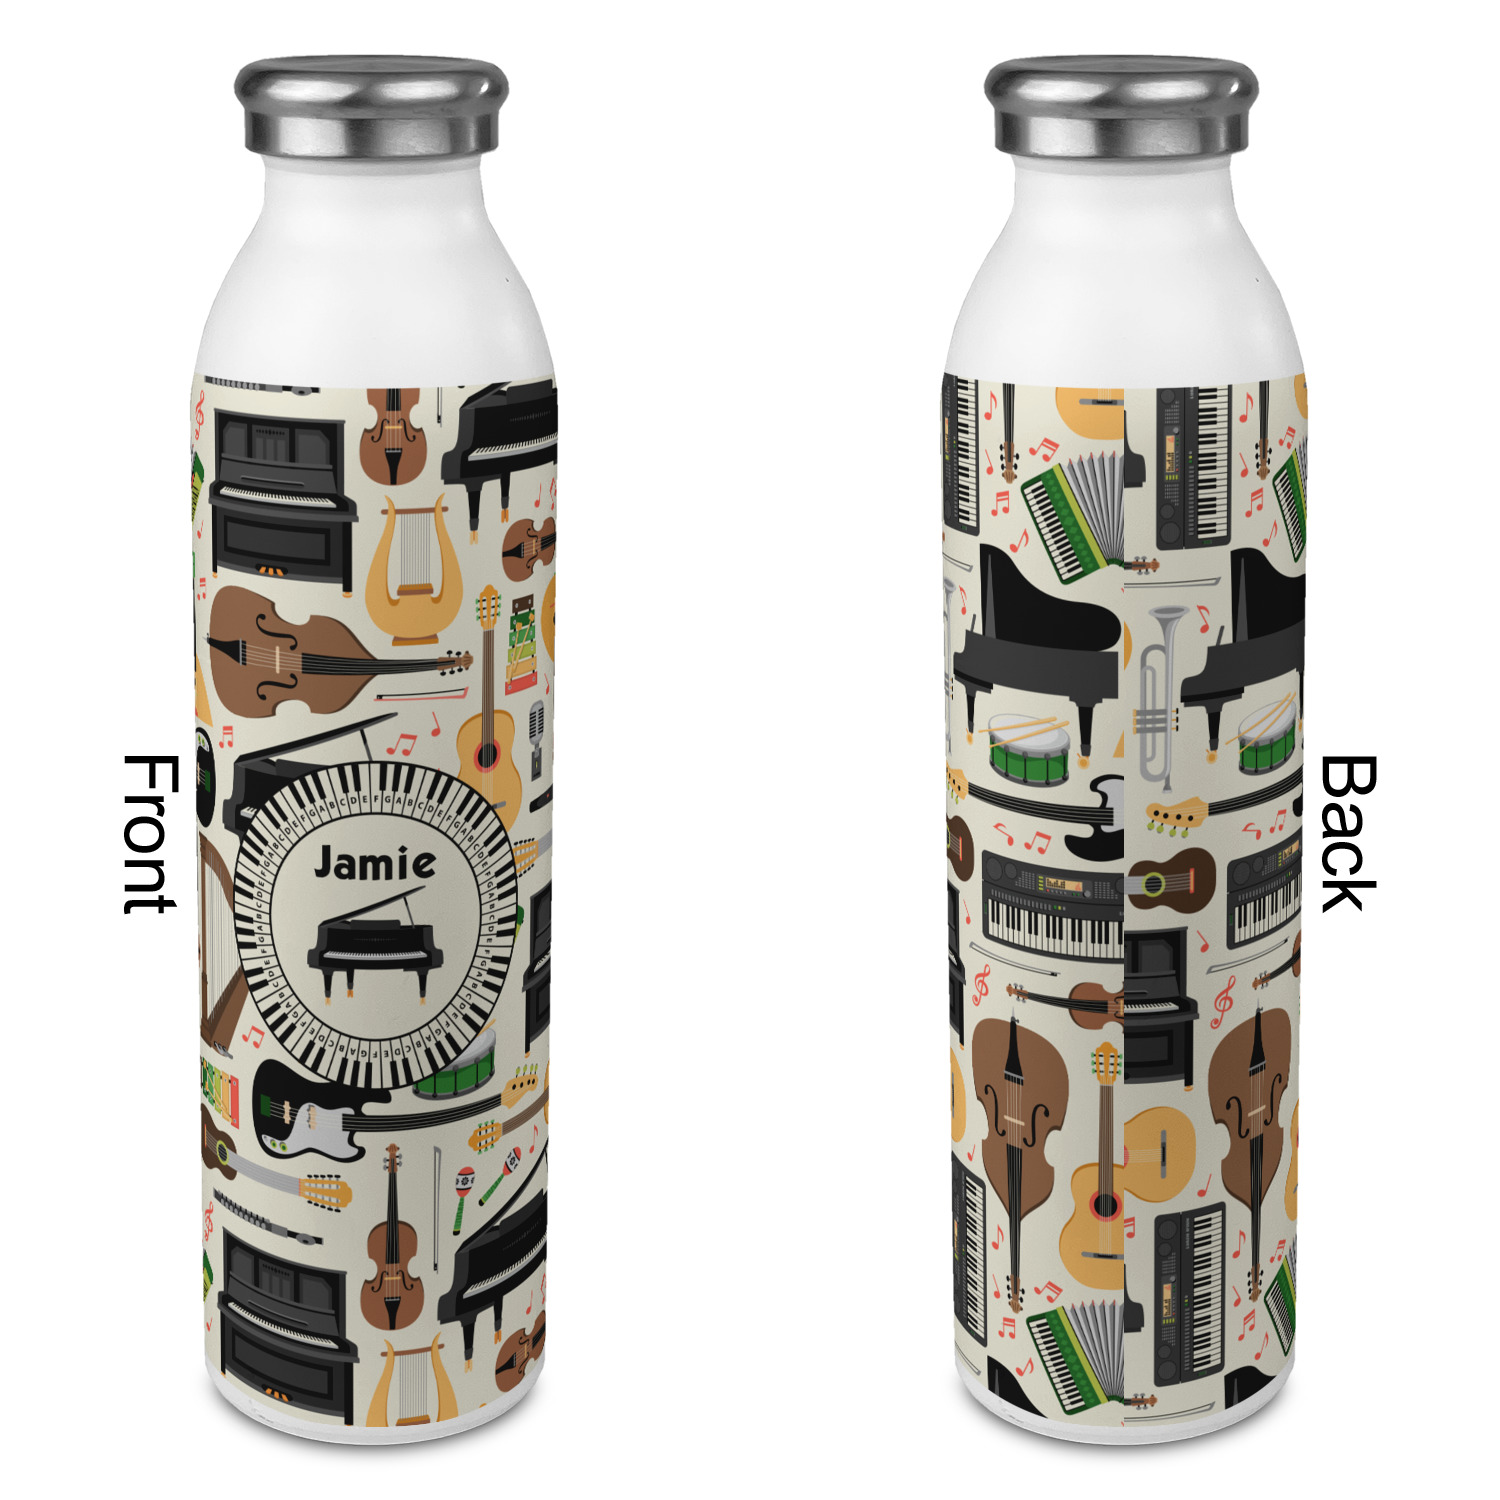 https://www.youcustomizeit.com/common/MAKE/483743/Musical-Instruments-20oz-Water-Bottles-Full-Print-Approval.jpg?lm=1665527661